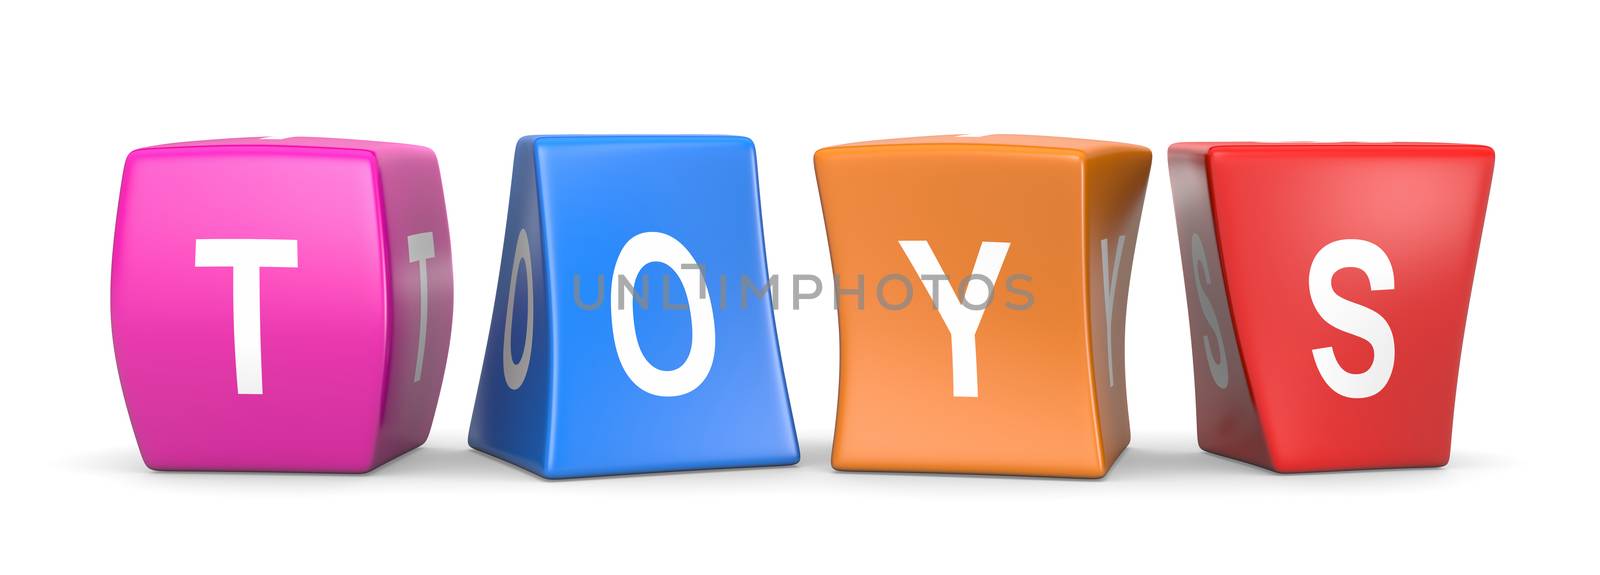 Toys White Text on Colorful Deformed Funny Cubes 3D Illustration on White Background